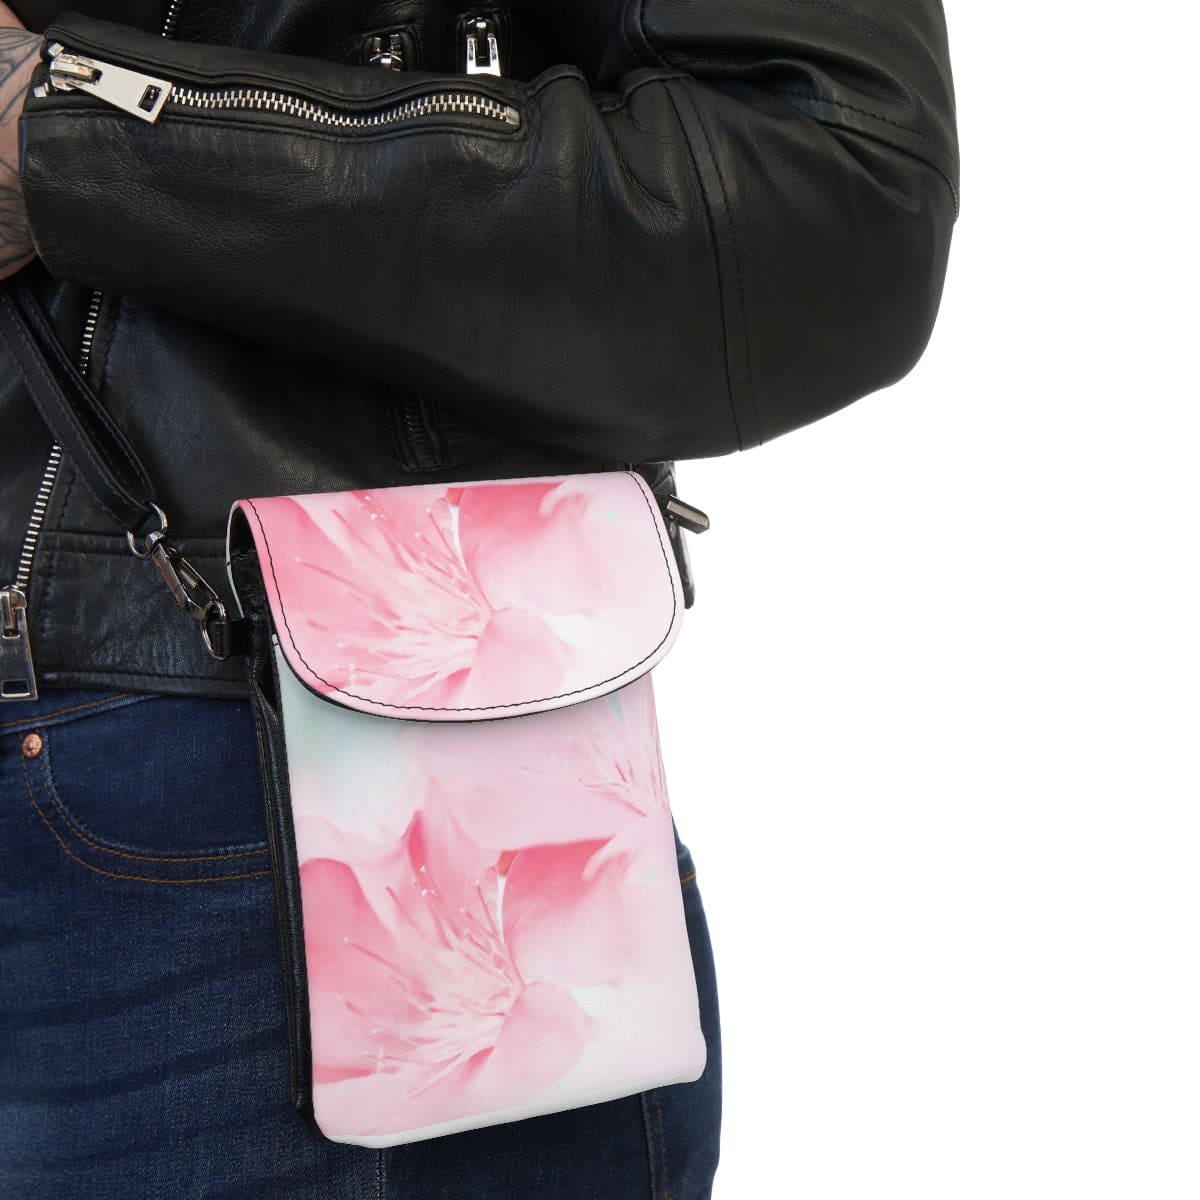 Crossbody Cell Phone Purse Pink Flower Bloom Peaceful Spring Nature - Bags